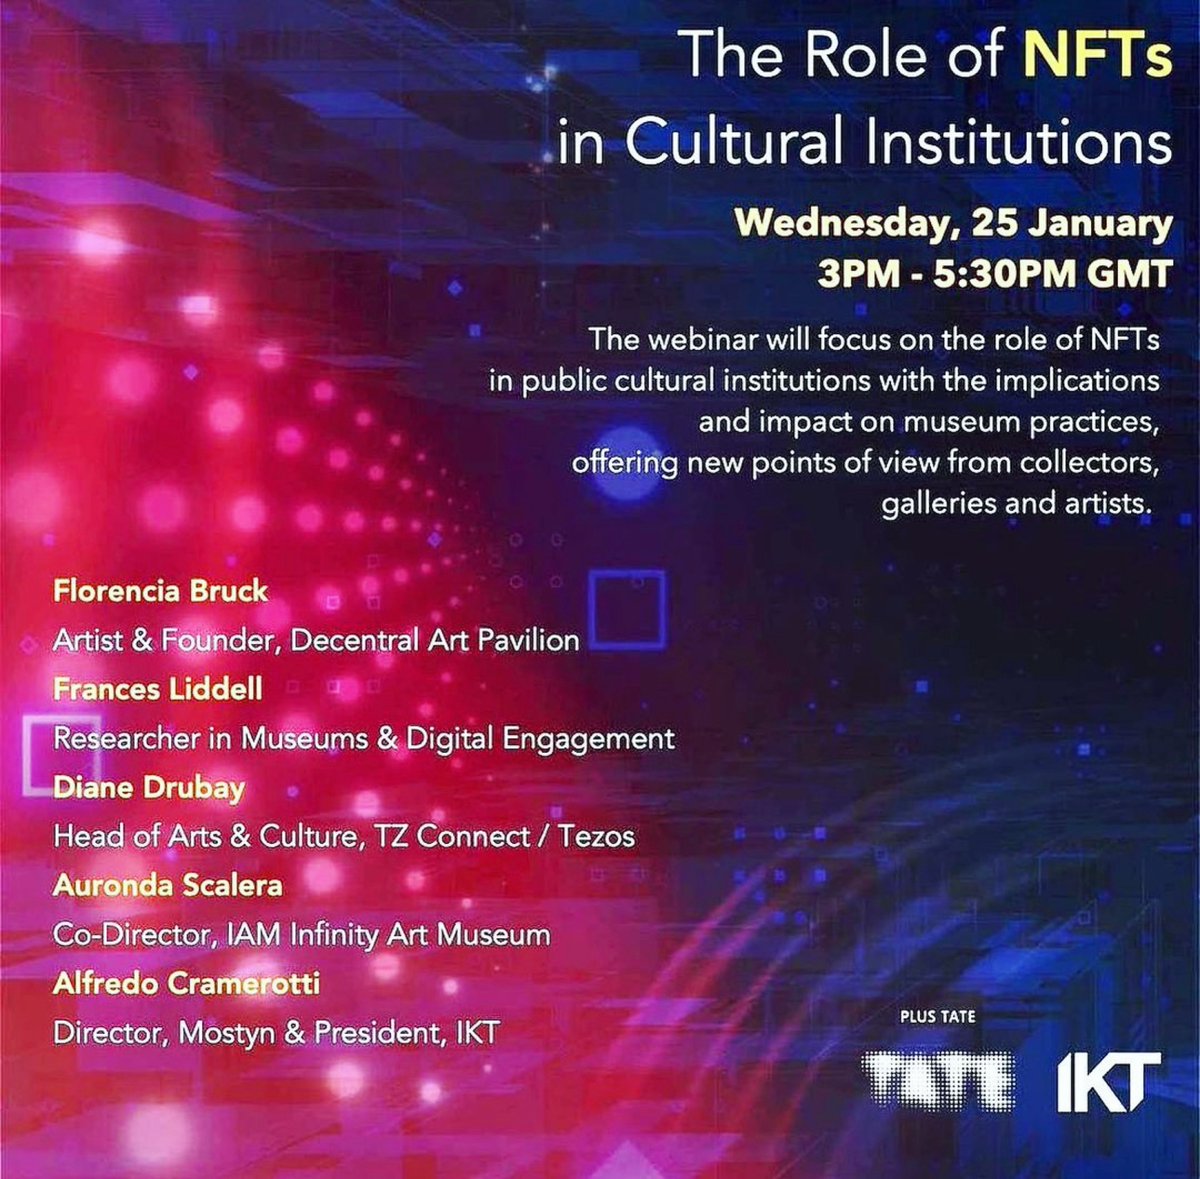 The Role of NFTs in Cultural Institutions: Wednesday, 25 January (3PM - 5:30PM GMT) The webinar will focus on the role of NFTs in public cultural institutions. @tate @dartpavilion @AurondaScalera @CuratorView @FlorenciaBruck #franceslidelld eventbrite.co.uk/e/the-role-of-…